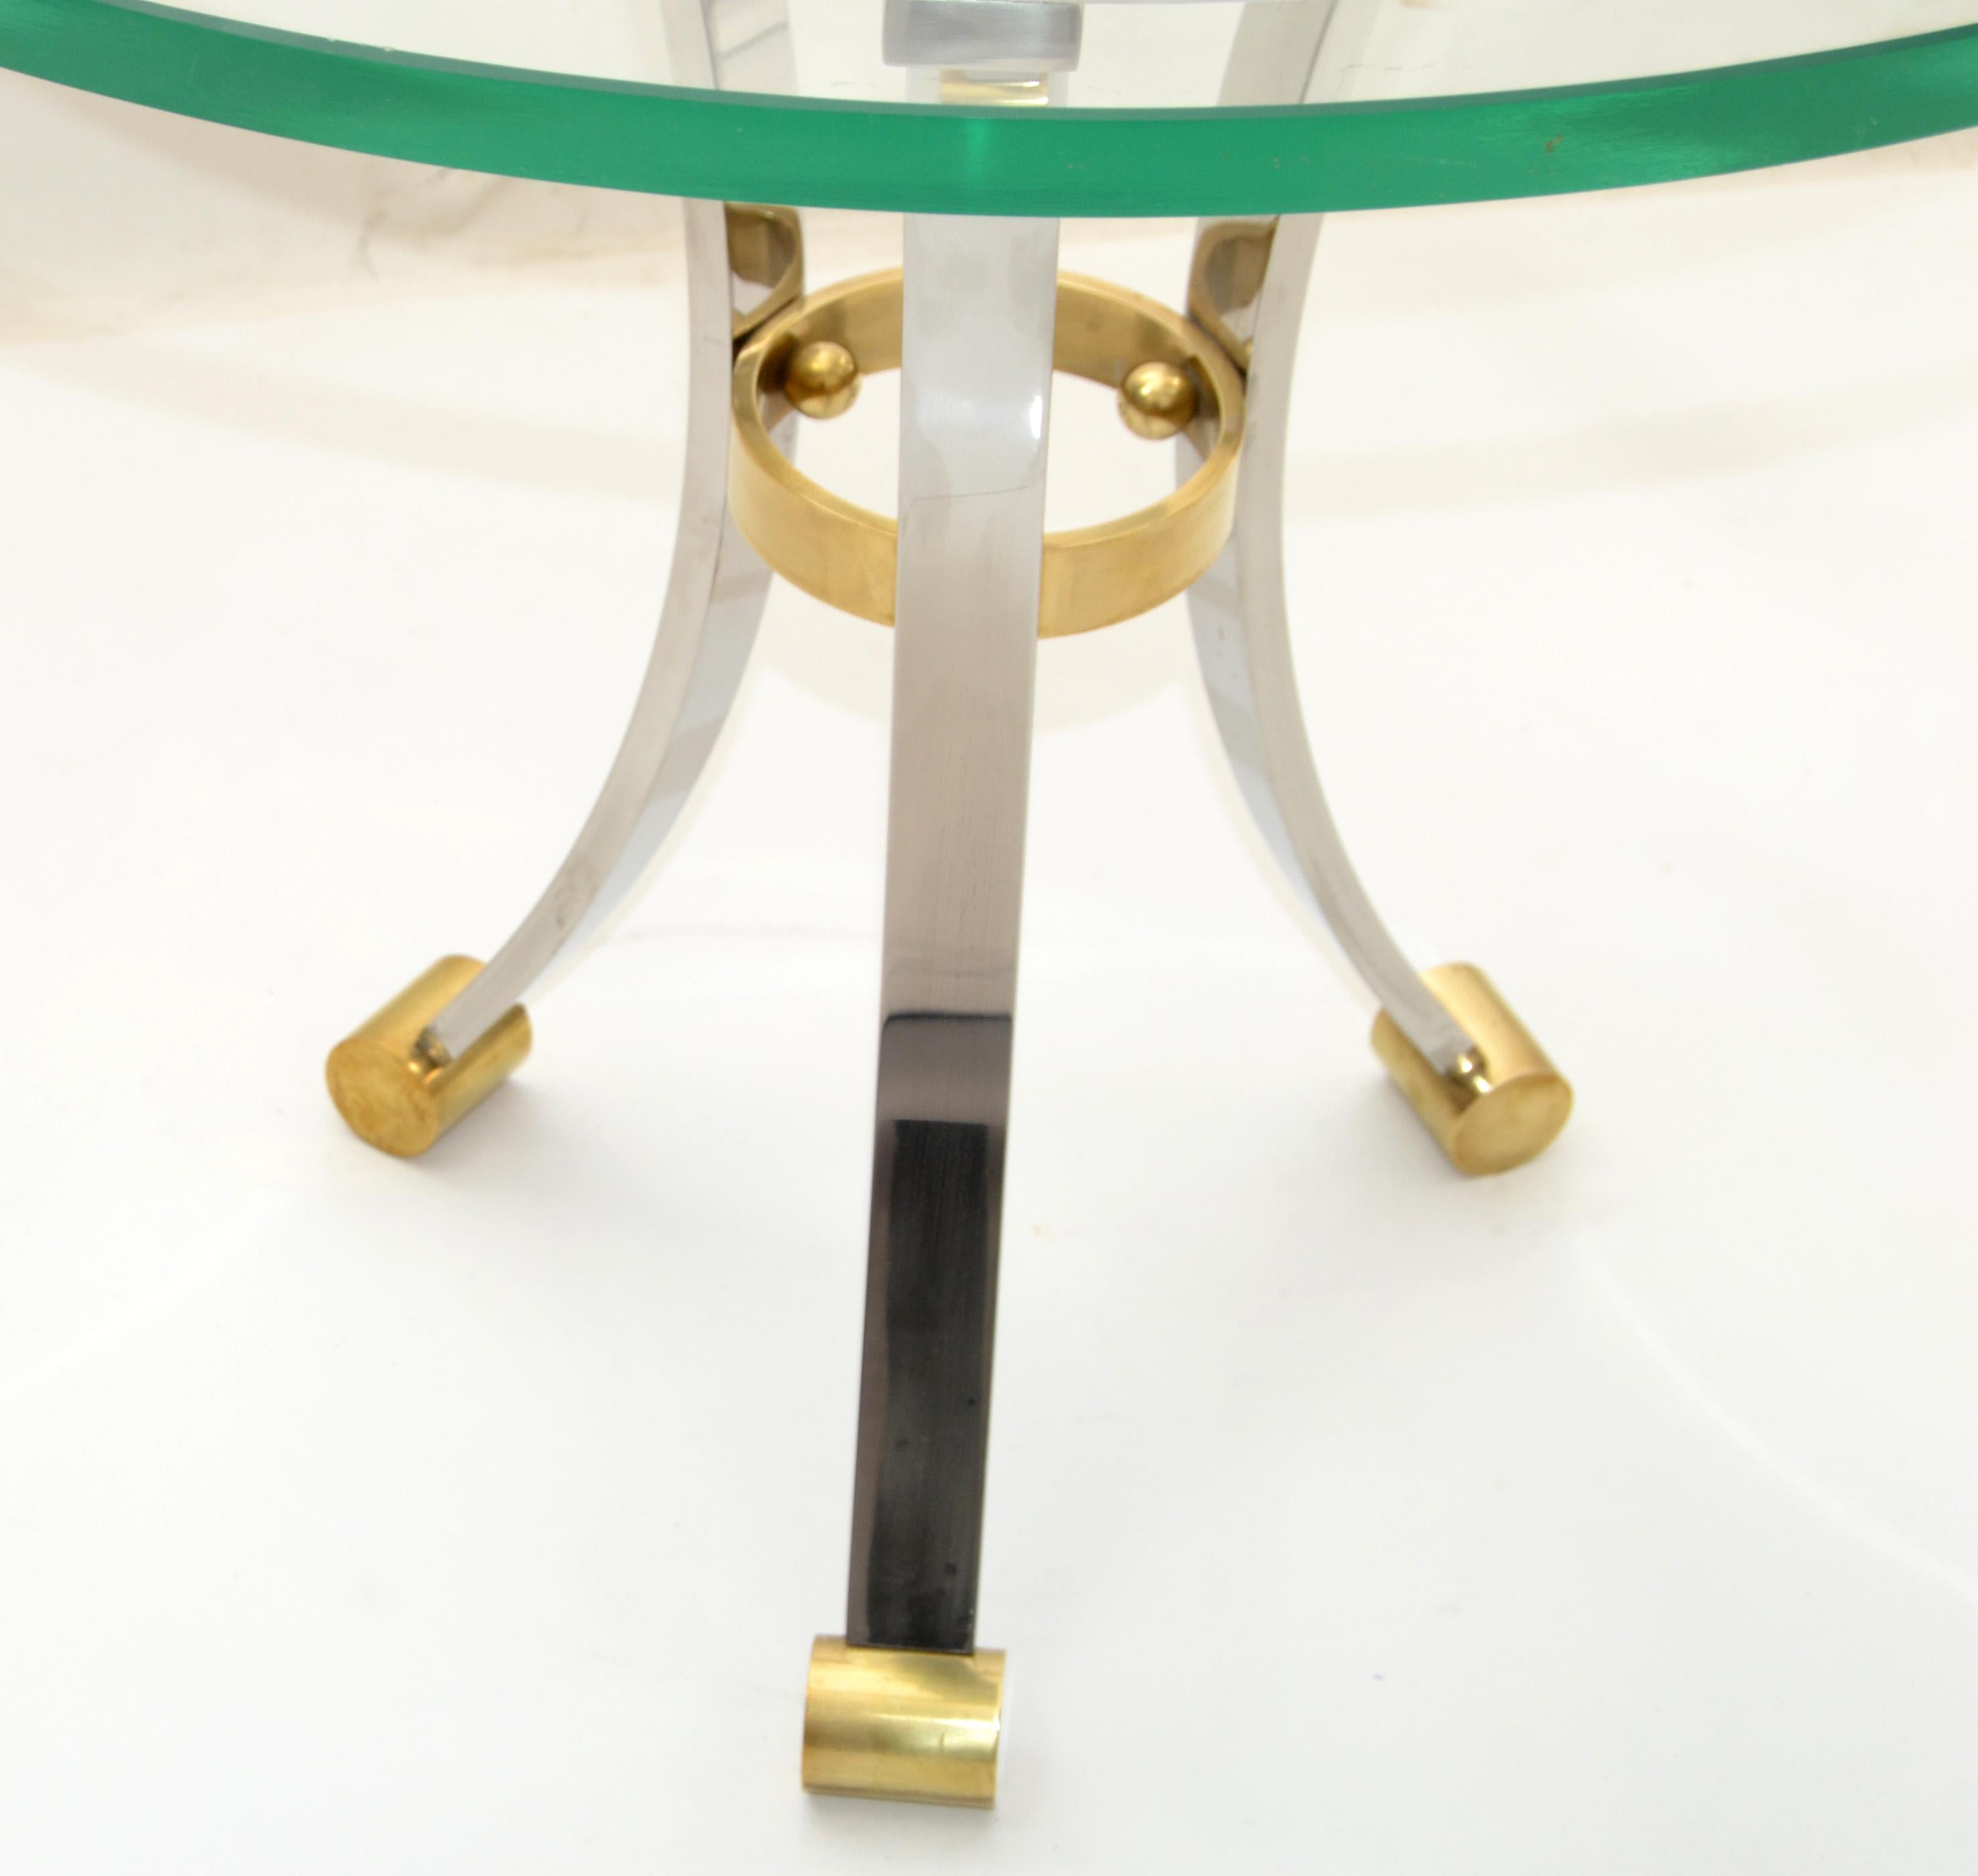 French Maison Jansen Round Glass, Brass & Steel Coffee Table Neoclassical, 1960s For Sale 9